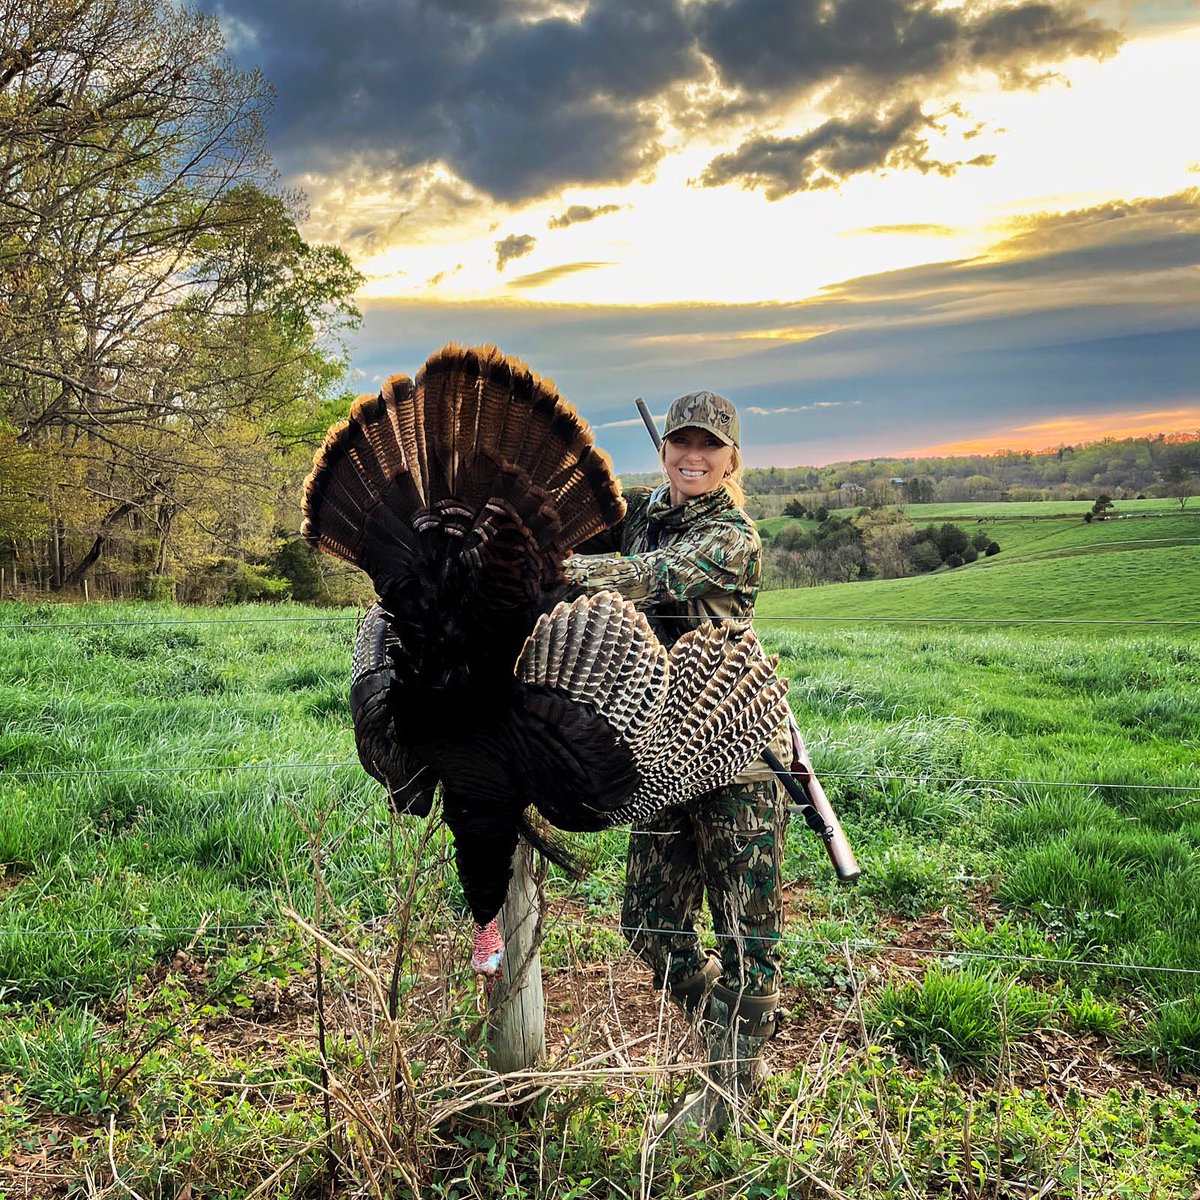 Same place, different season. Opening day in KY did not disappoint once again! Congrats Kim Sullivan! #fallobsession #fallobsessed #turkey #turkeyhunting #turkeyhunter #turkeyhunt #springturkey #springturkeyseason #cantstoptheflop #huntress #girlswhohunt